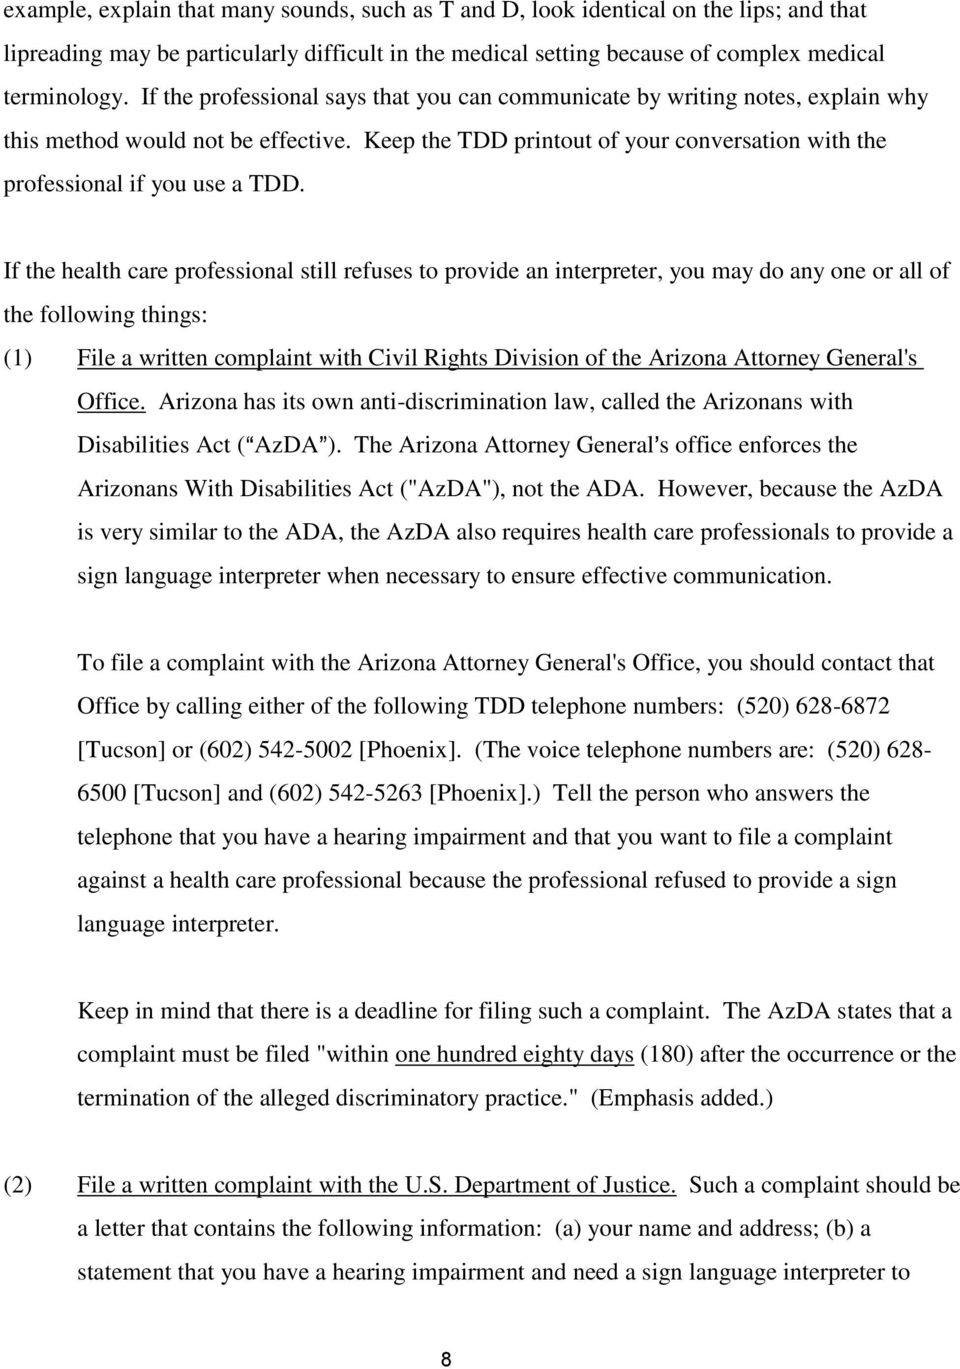 If the health care professional still refuses to provide an interpreter, you may do any one or all of the following things: (1) File a written complaint with Civil Rights Division of the Arizona